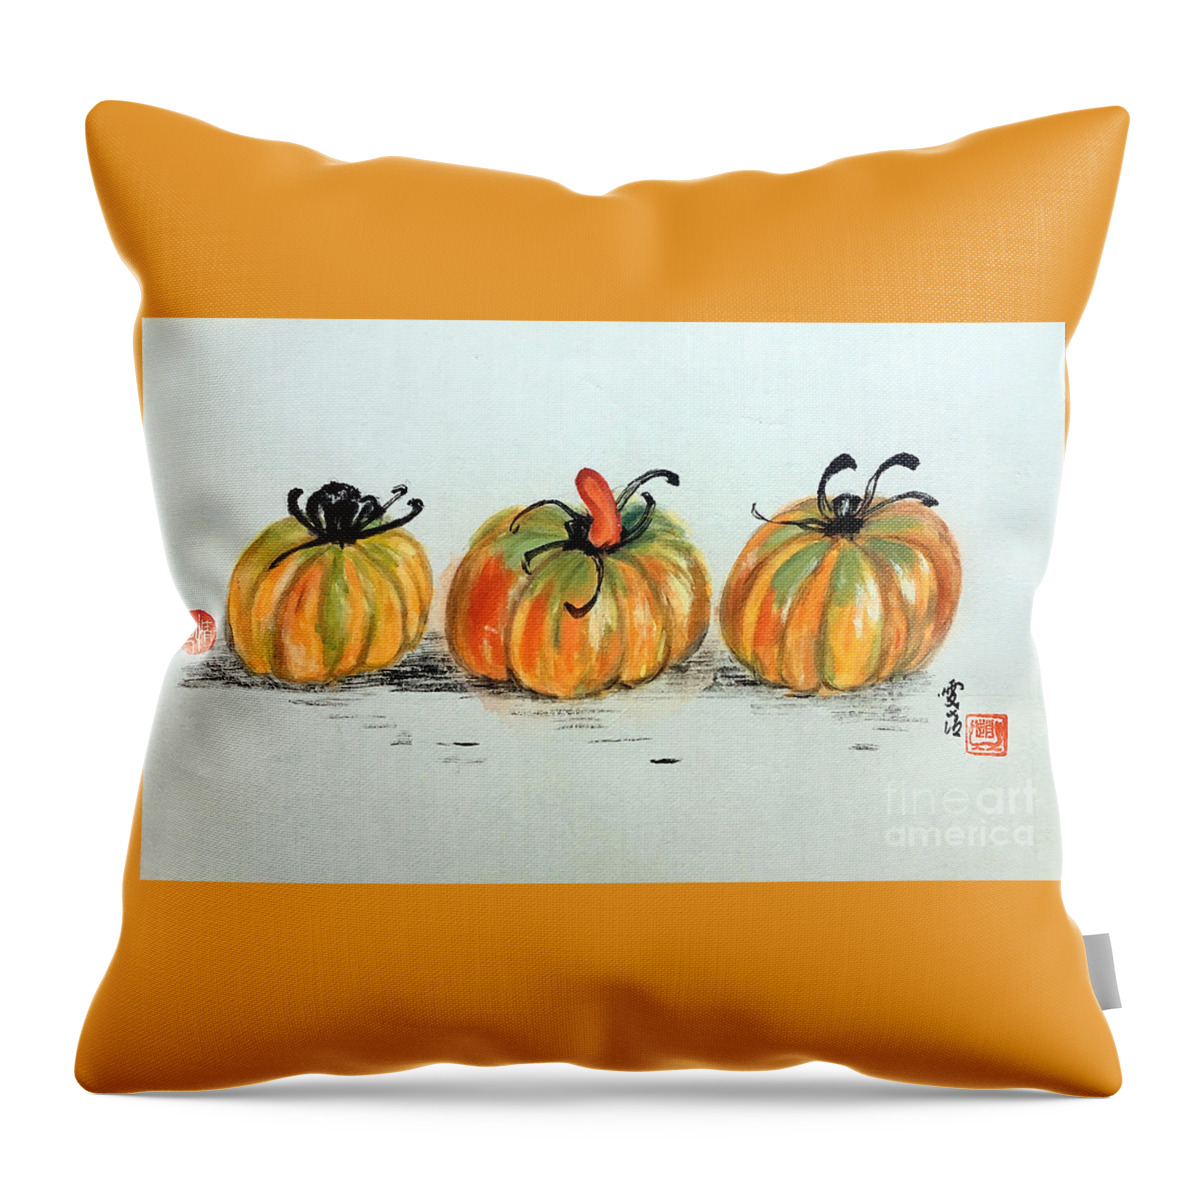 Vegetarian Throw Pillow featuring the painting Vegetarian Plant-Tomatoes by Carmen Lam